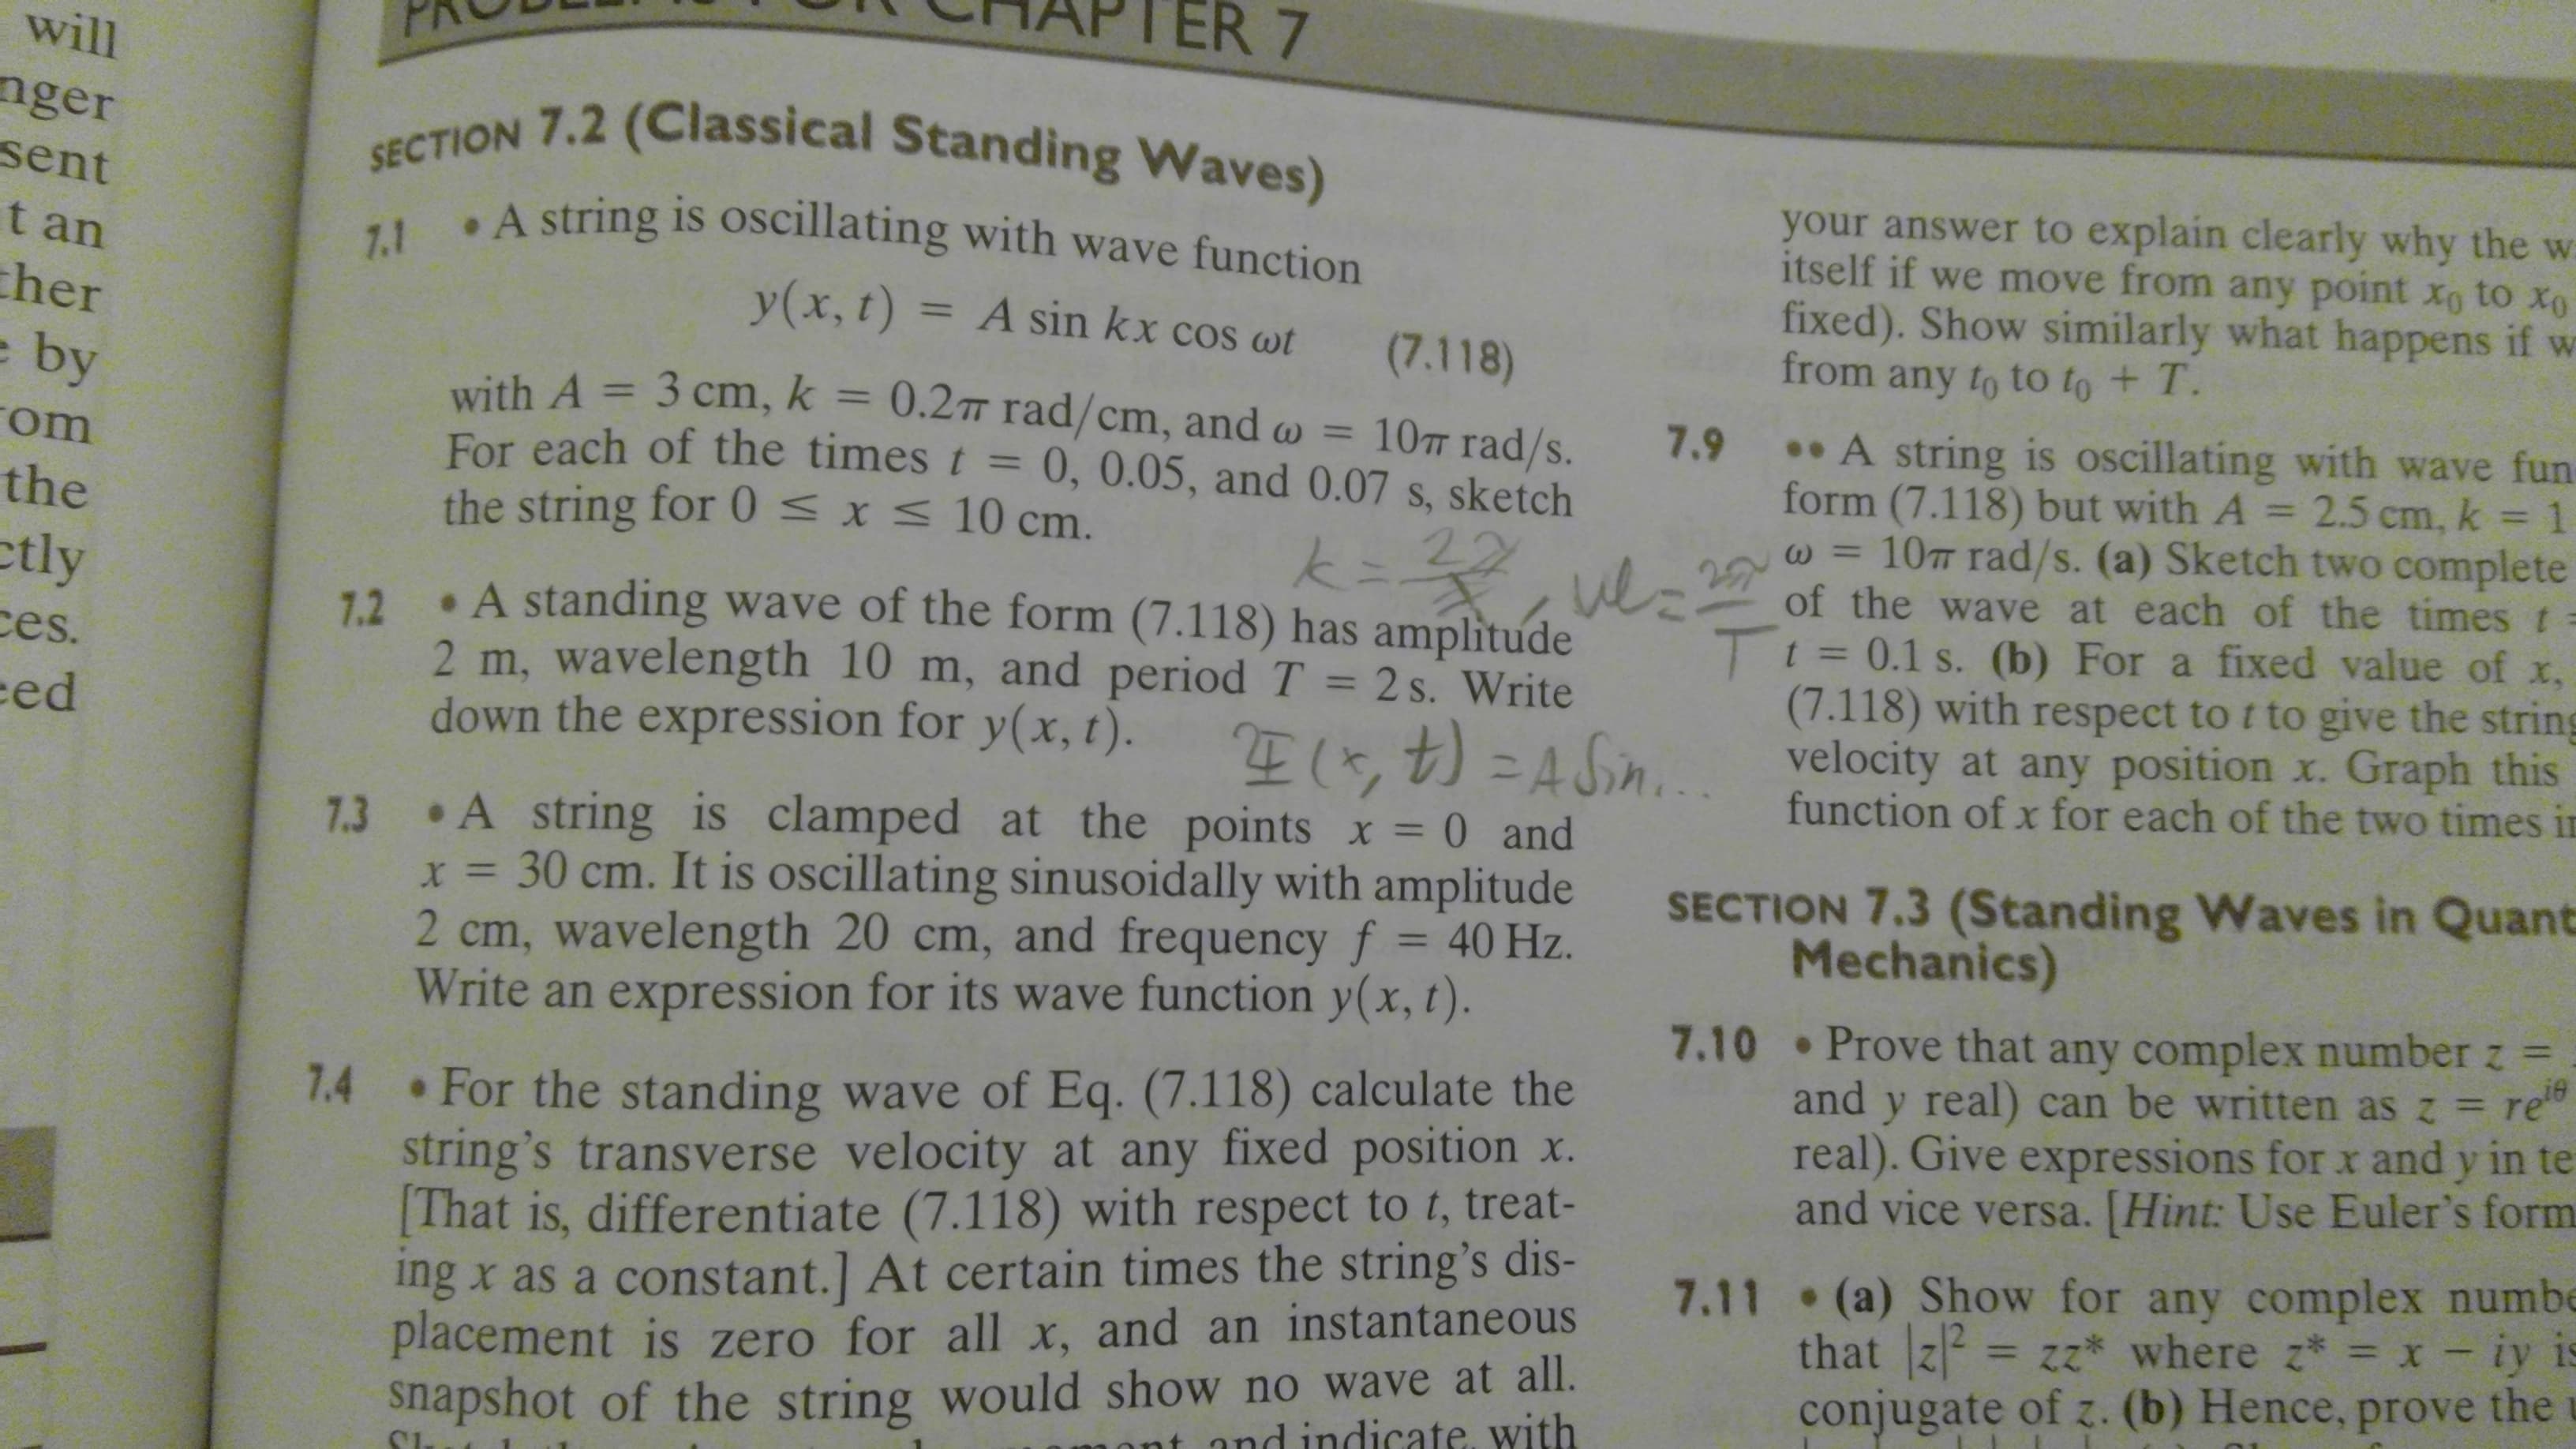 R 7
will
nger
sent
SECTION 7.2 (Classical Standing Waves)
your answer to explain clearly why the w
itself if we move from any point xo to Xo
fixed). Show similarly what happens if w
from any to to to + T.
7.1
. A string is oscillating with wave function
t an
y(x, t)
= A sin kx cos ot
her
(7.118)
e by
om
the
ctly
es.
ed
with A 3 cm, k = 0.2m rad/cm, and o
For each of the times t = 0, 0.05, and 0.07 s, sketch
the string for 0 x 10 cm.
10TT rad/s.
A string is oscillating with wave fun
7.9
2.5 cm, k
1
form (7.118) but with A
www.d
10TT rad/s. (a) Sketch two complete
of the wave at each of the times t =
t=0.1 s. (b) For a fixed value of x,
(7.118) with respect to t to give the string
velocity at any position x. Graph this
function of x for each of the two times in
K
22
A standing wave of the form (7.118) has amplitude
7.2
2 m, wavelength 10 m, and period T 2s. Write
down the expression for y(x, t)
E71 4
7.3 A string is clamped at the points x = 0 and
x= 30 cm. It is oscillating sinusoidally with amplitude
2 cm, wavelength 20 cm, and frequency f = 40 Hz.
Write an expression for its wave function y(x, t).
SECTION 7.3 (Standing Waves in Quant
Mechanics)
7.10 Prove that any complex number z =
and y real) can be written as z re"
real). Give expressions for x and y in te
and vice versa. [Hint: Use Euler's form
For the standing wave of Eq. (7.118) calculate the
string's transverse velocity at any fixed position x.
[That is, differentiate (7.118) with respect to t, treat-
ing x as a constant.] At certain times the string's dis-
placement is zero for all x, and an instantaneous
7.4
7.11 (a) Show for any complex numbe
that z2zz where z = x - iy is
conjugate of z. (b) Hence, prove the
snapshot of the string would show no wave at all.
and indicate. with
